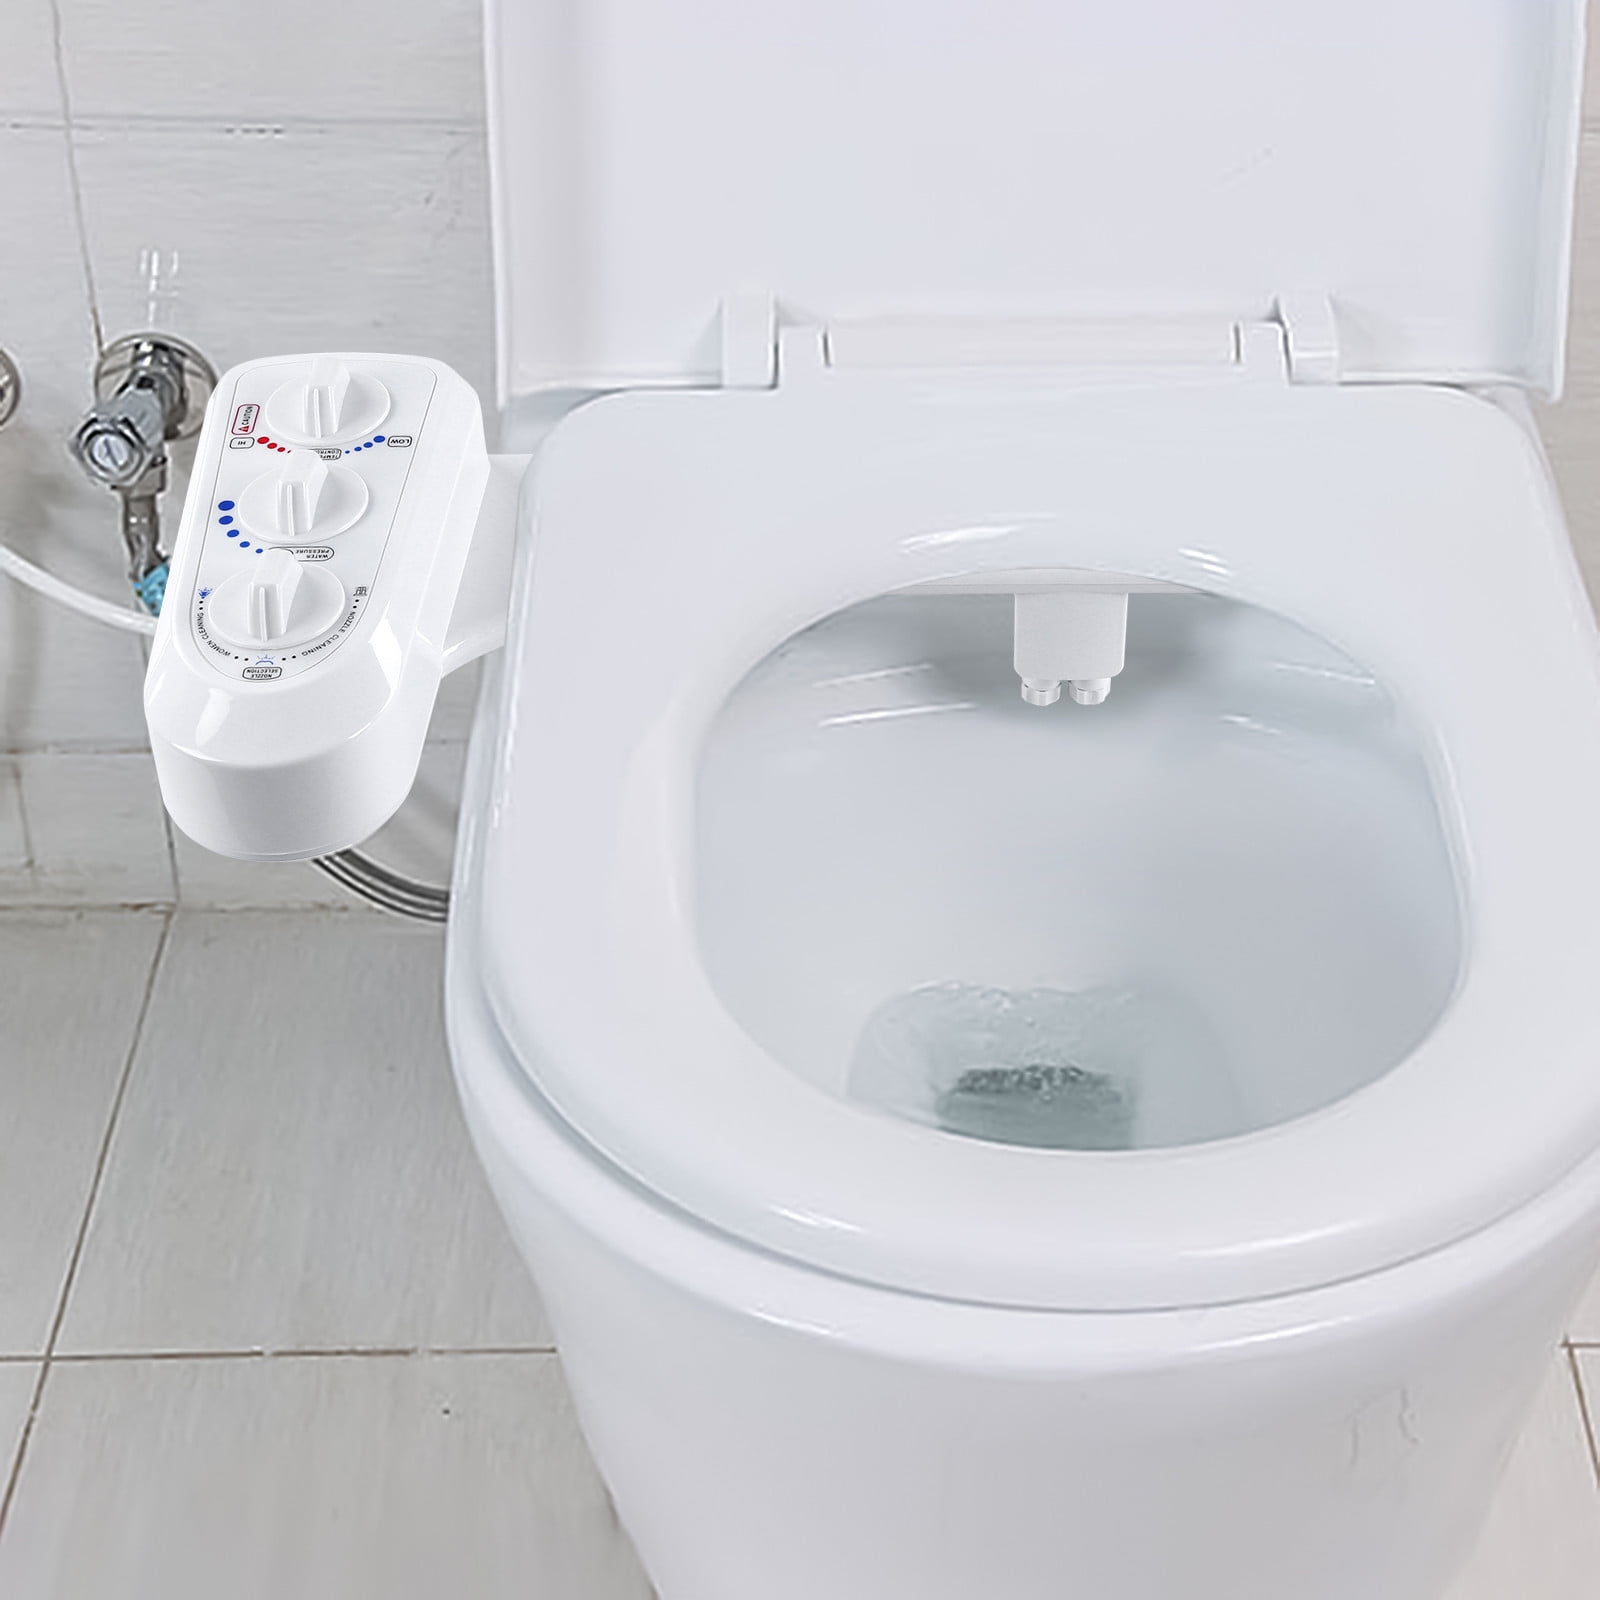 HOT/COLD Water Bidet Non Electric Toilet Seat Attachment/very simple